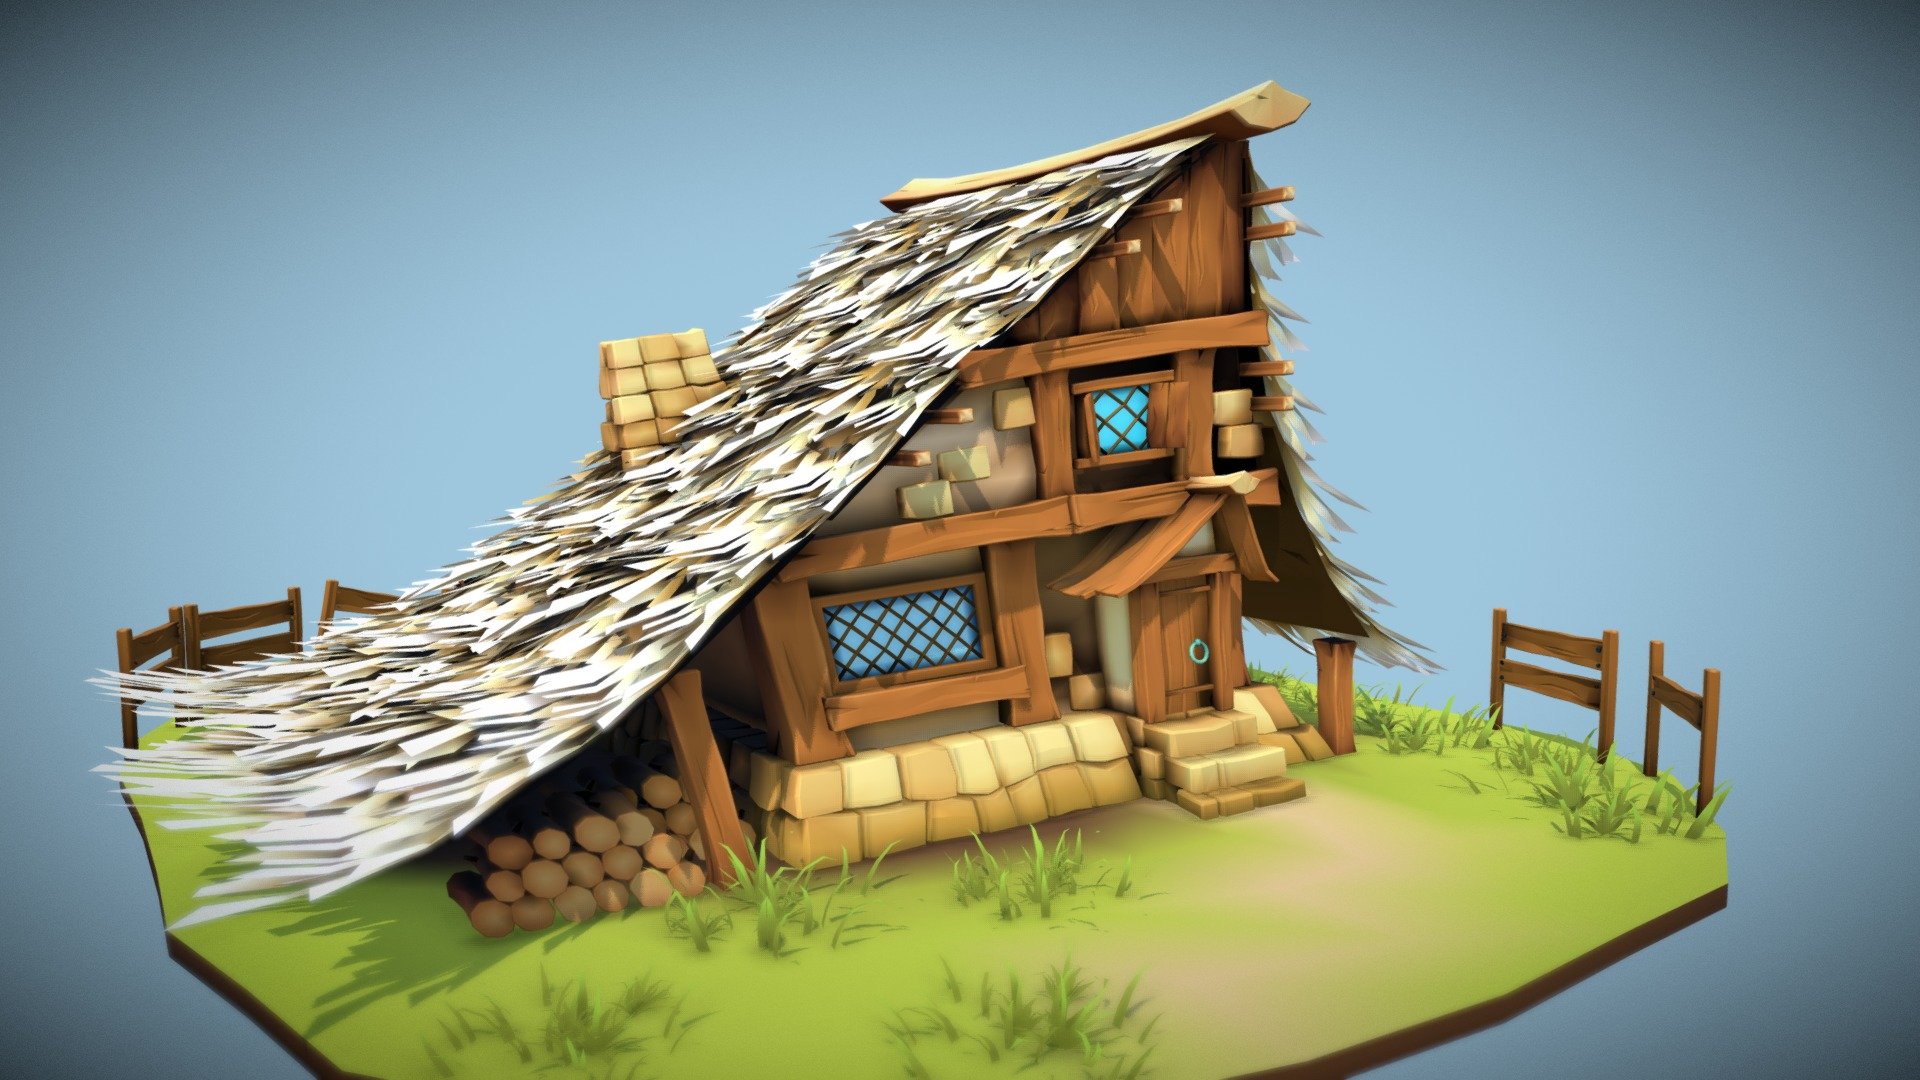 Otto's &amp; Ana's cozy cottage for the upcoming game Masters of Anima. https://www.youtube.com/watch?v=4zNayrAeBPA

The whole scene is colored using vertex paint and radiosity only. It's 100% texture free! 
Also, Master of Anima being a top-down game, I deformed the house to make it look nicer when viewed from the top 3d model